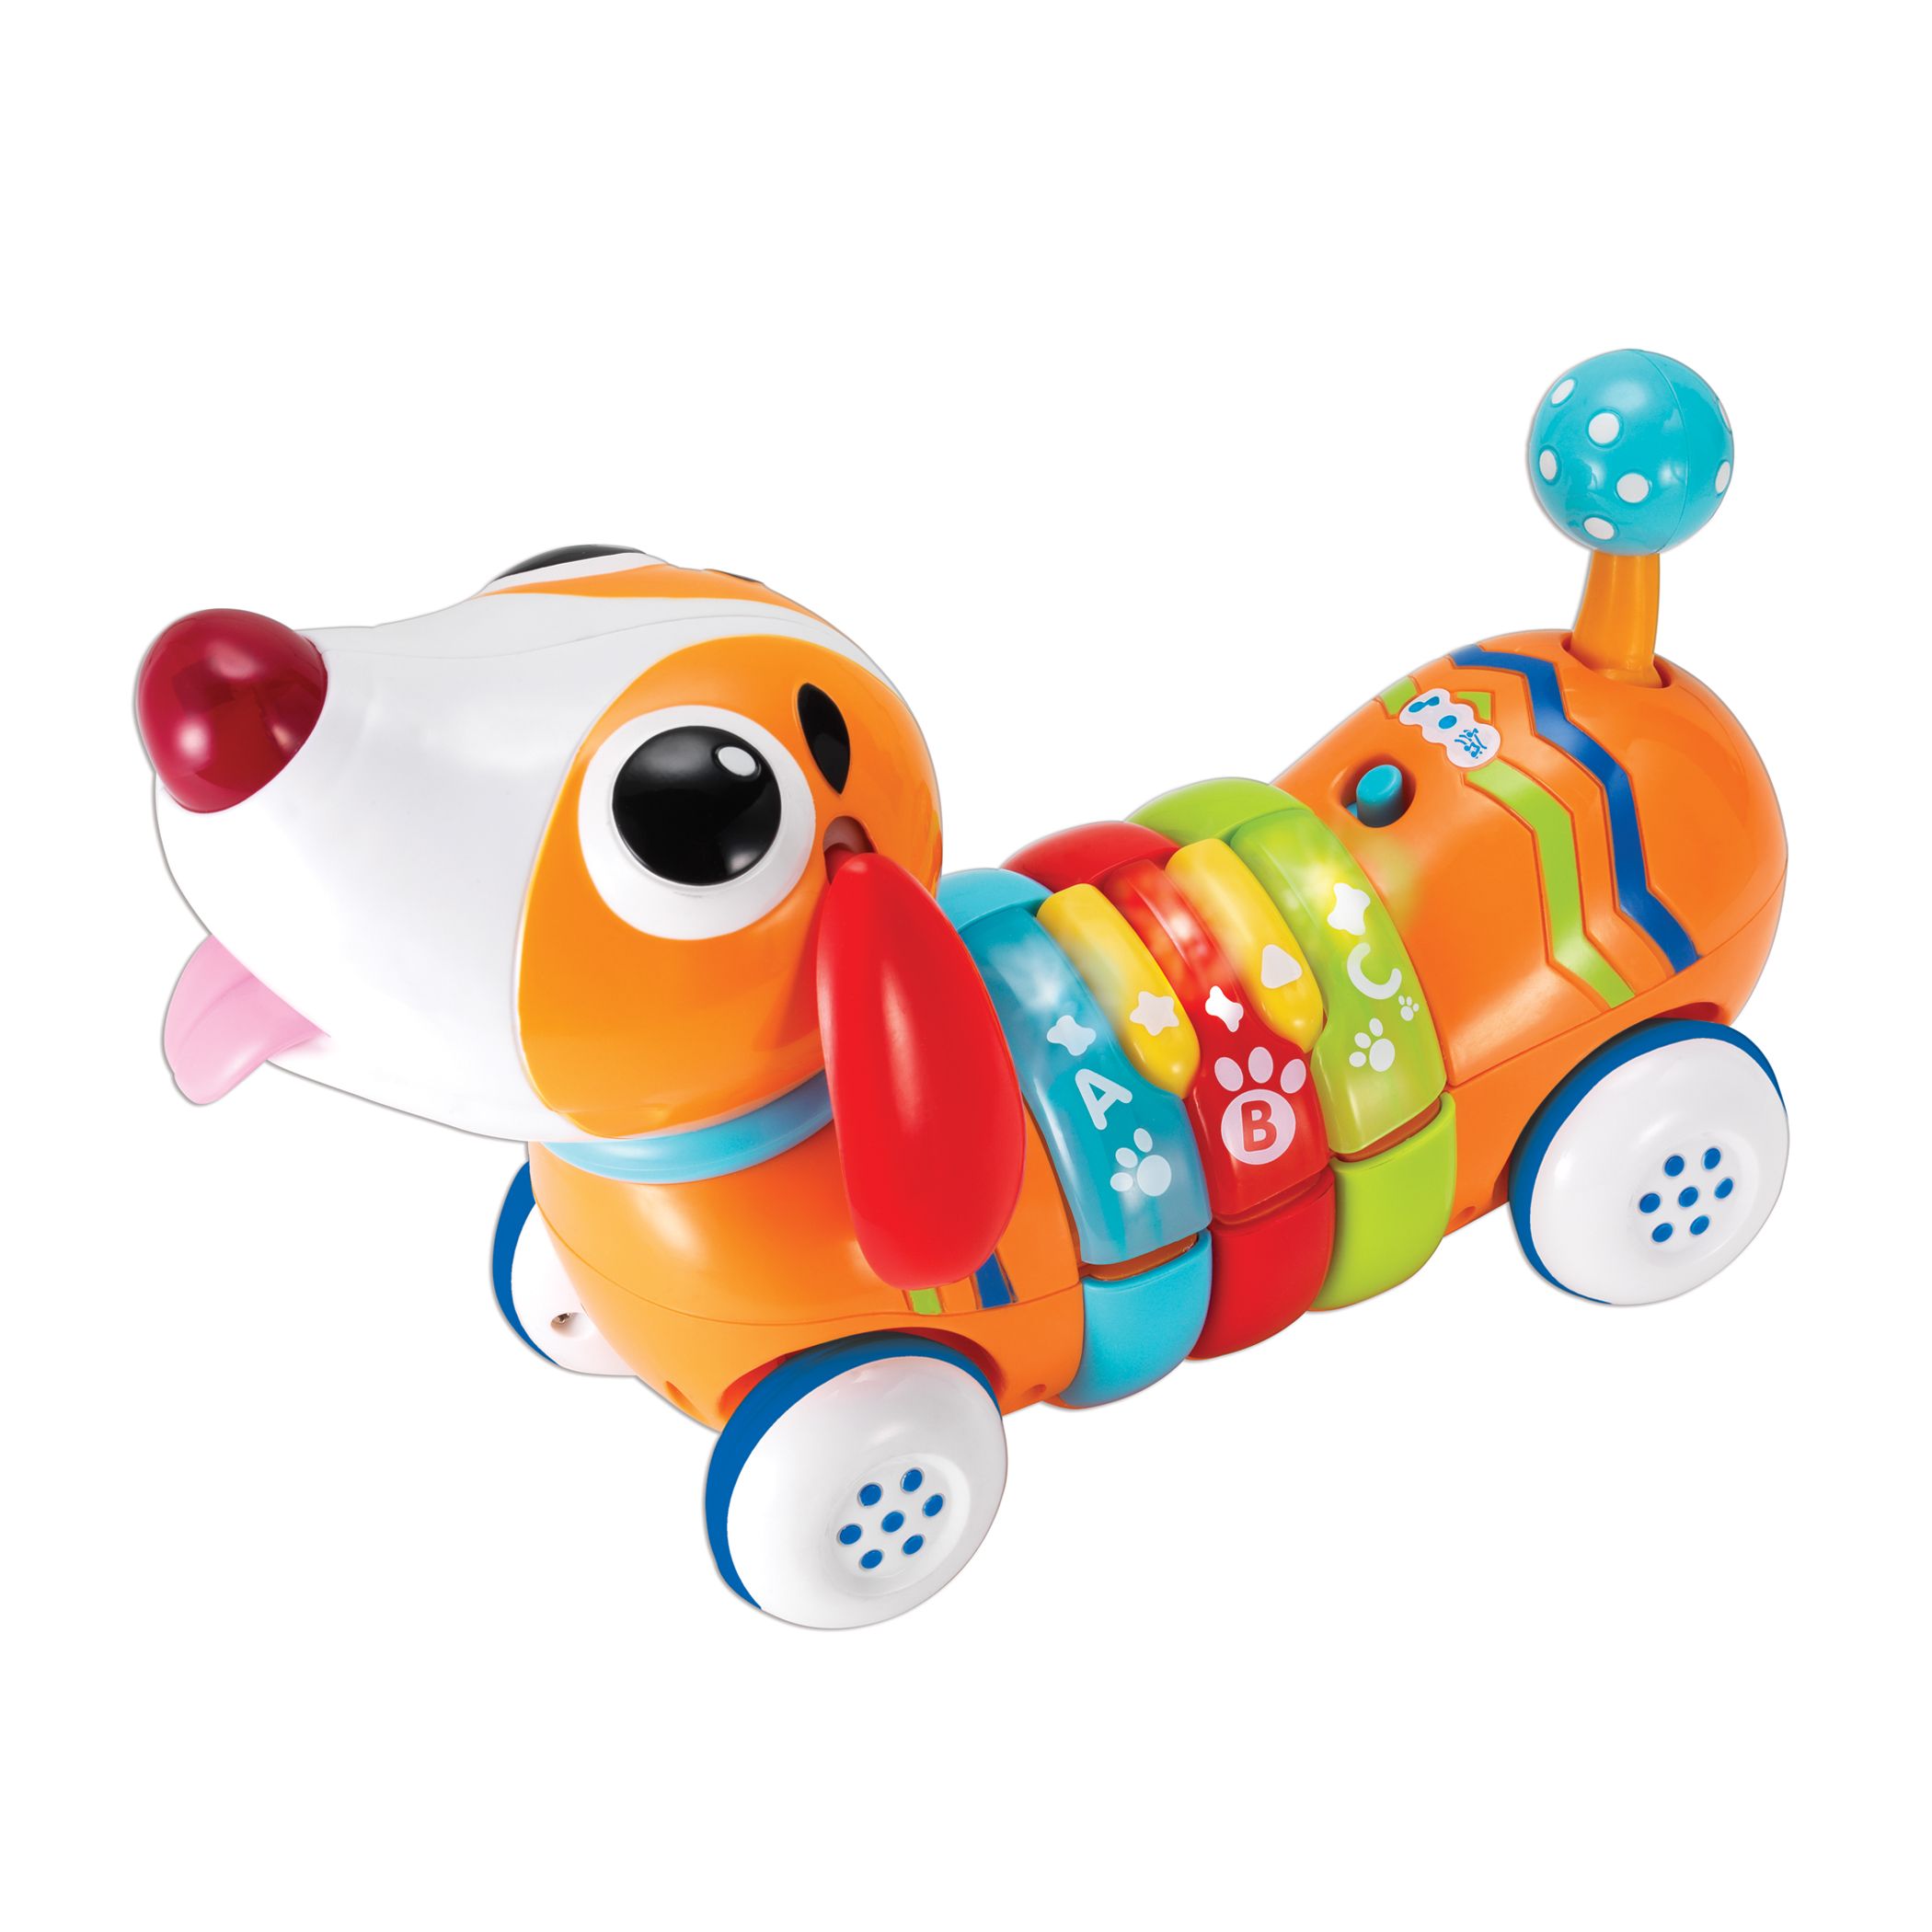 Picture of Winfun 1142 Remote Control Rainbow Puppy